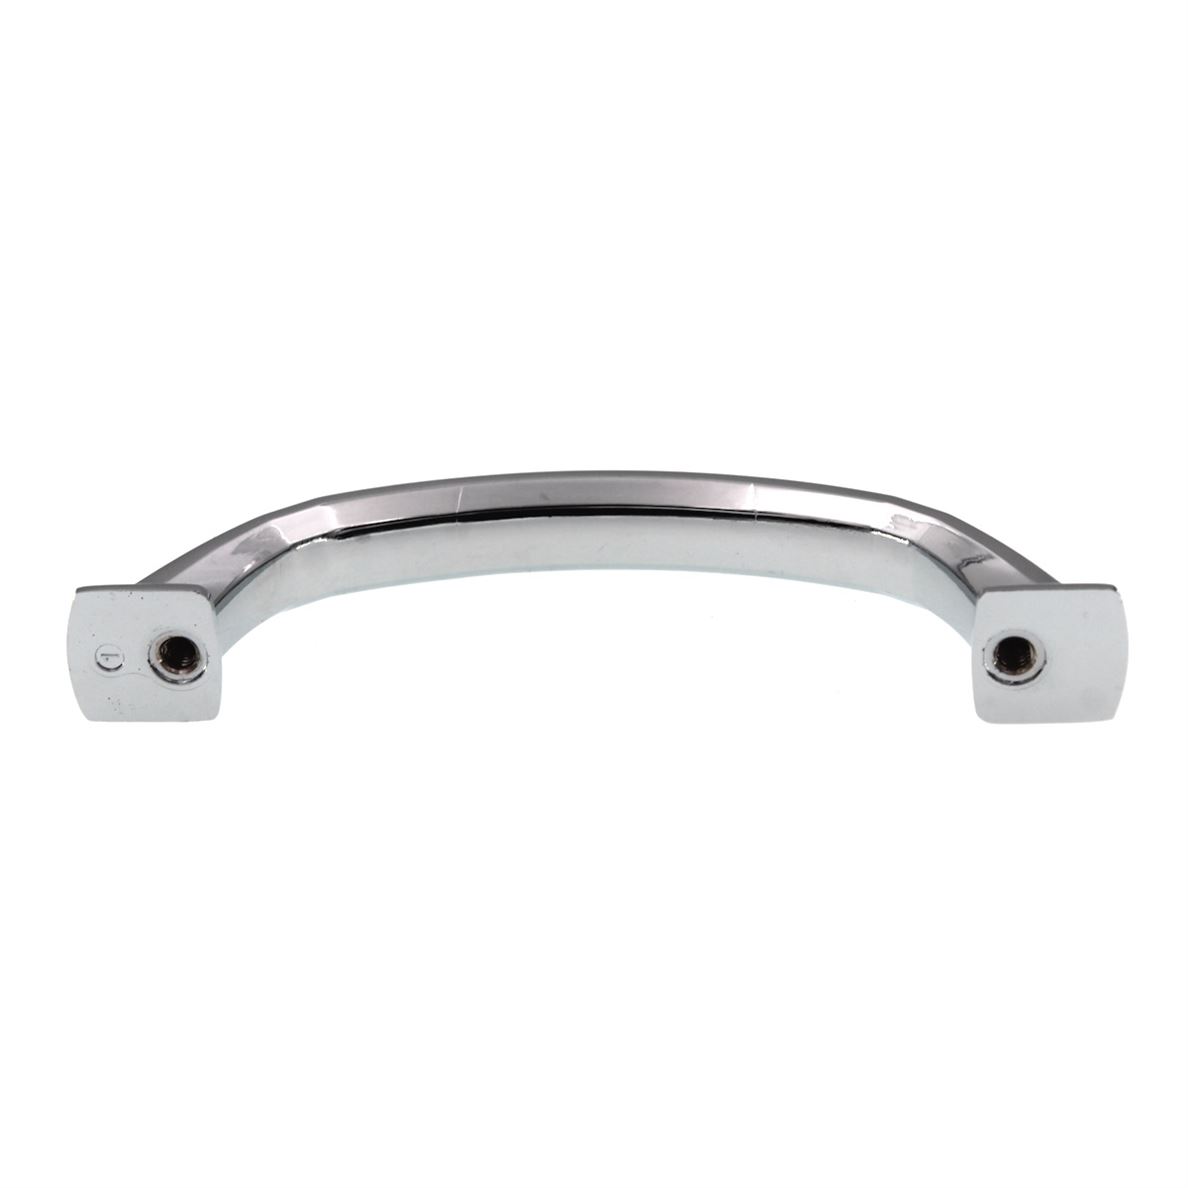 Pride Madison Cabinet Arch Pull 3 3/4" (96mm) Ctr Polished Chrome P93096-PC